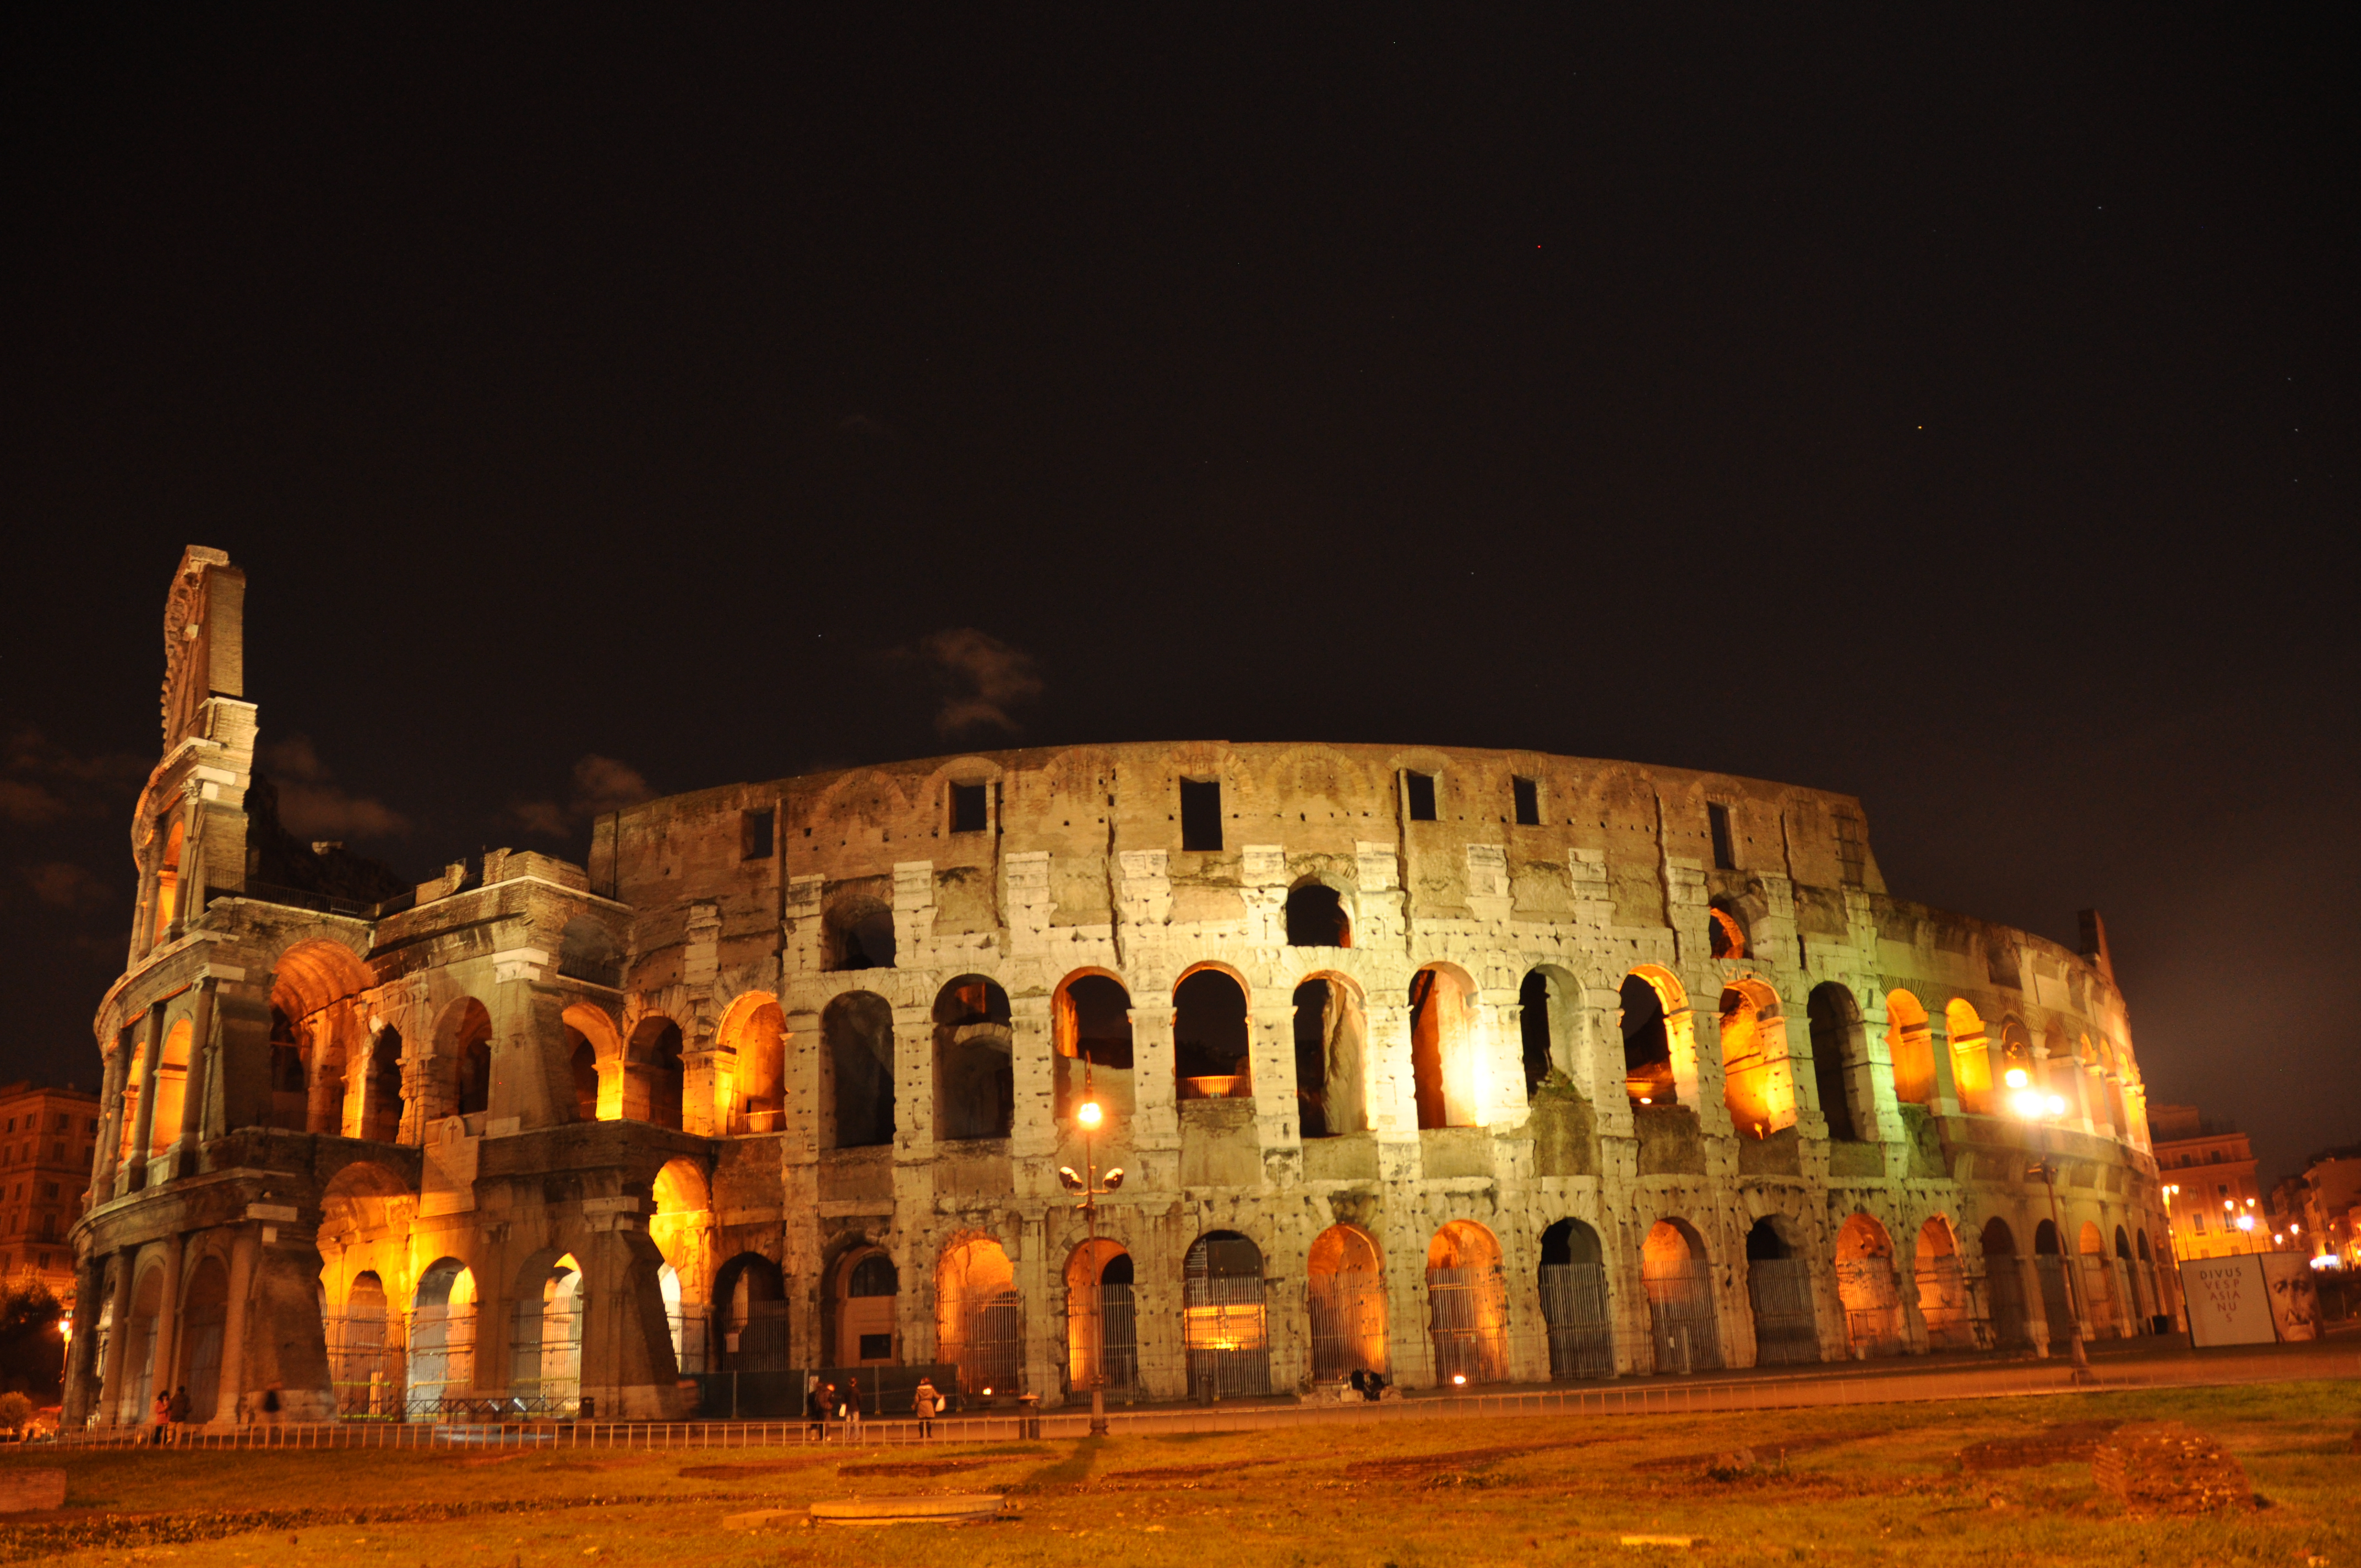 The Roman Colosseum is definitely one of the top reasons to visit Rome